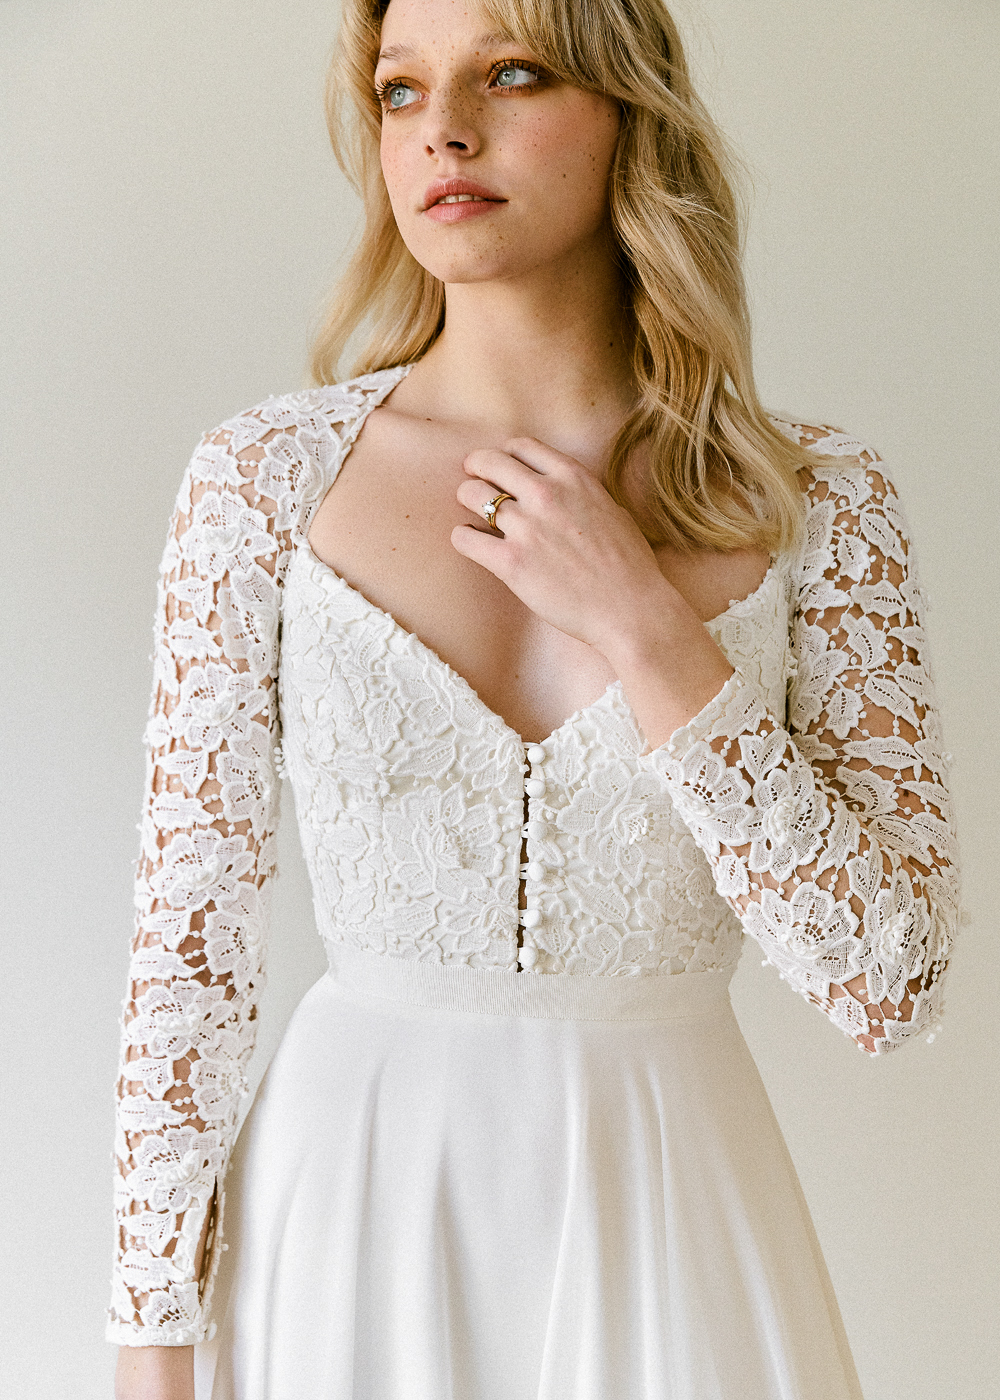 Romantic lace wedding gown by Truvelle